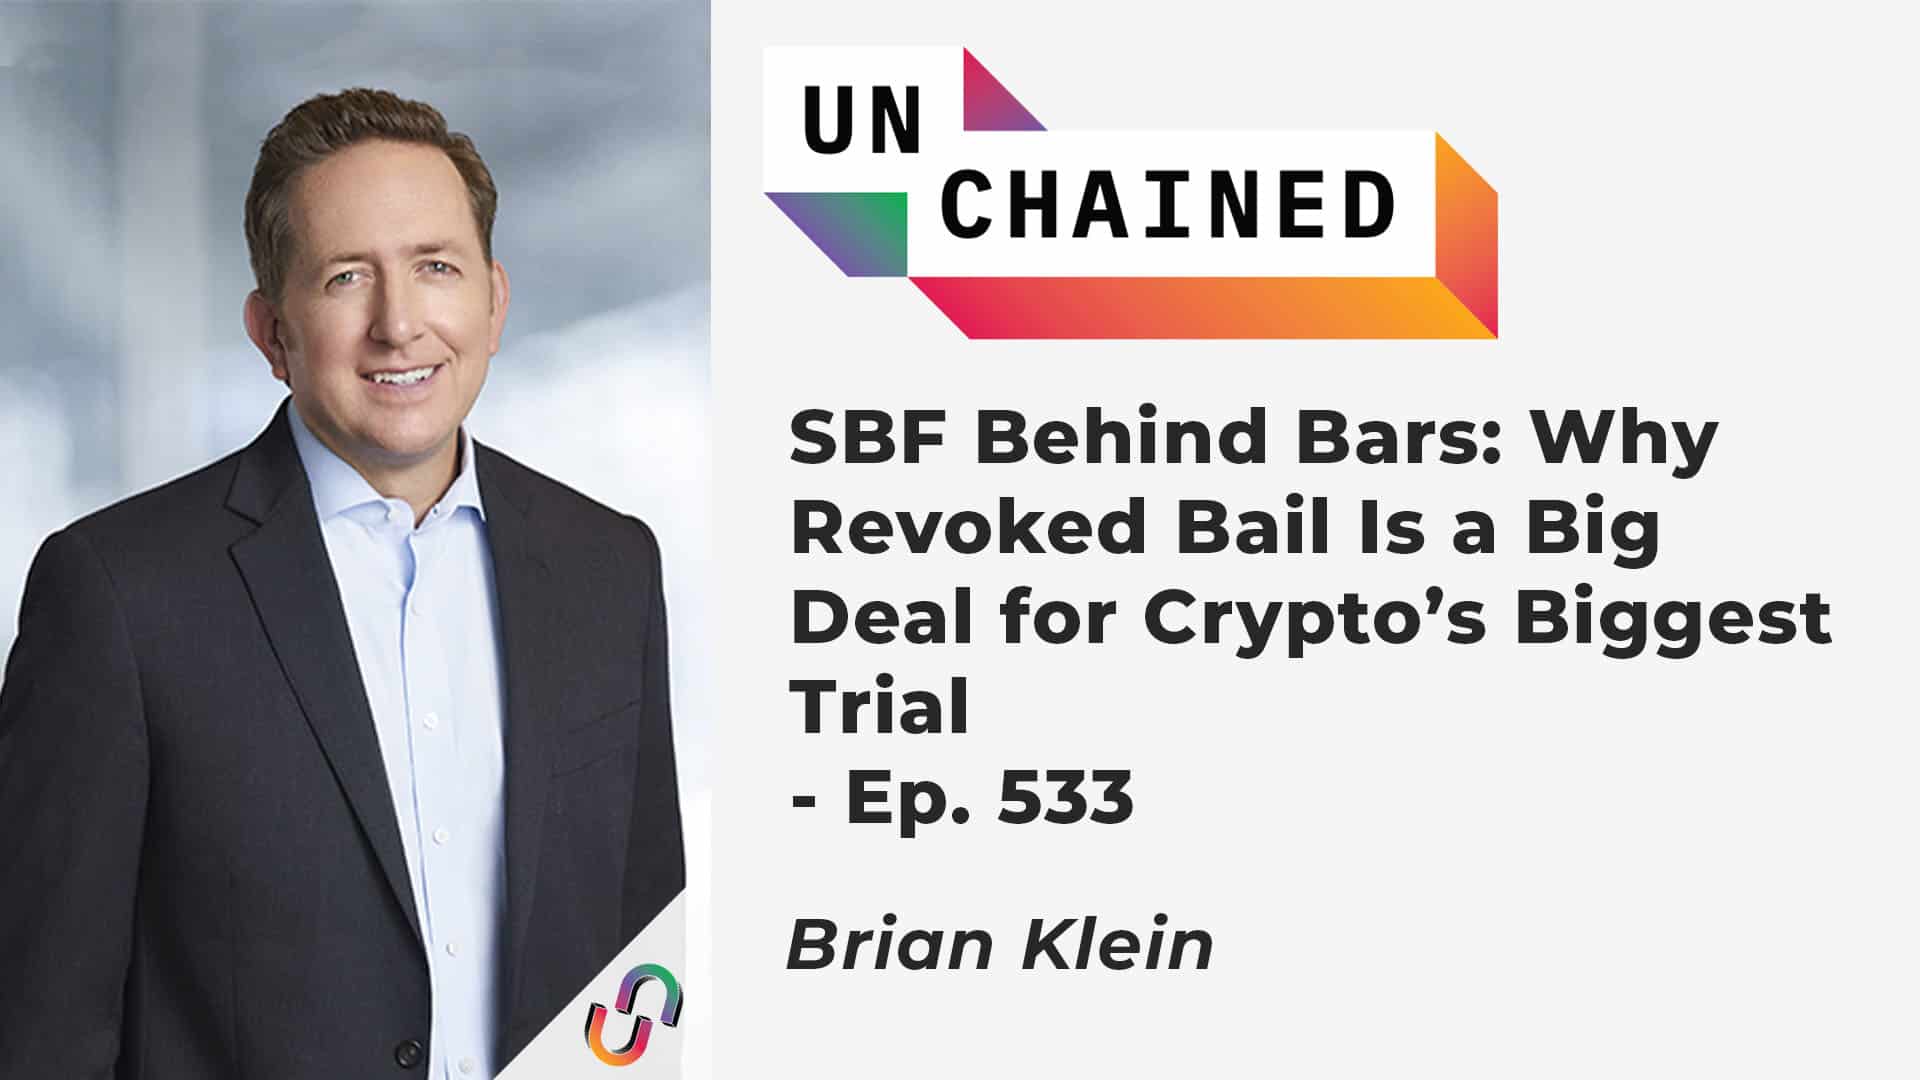 SBF Behind Bars: Why Revoked Bail Is a Big Deal for Crypto’s Biggest Trial - Ep. 533